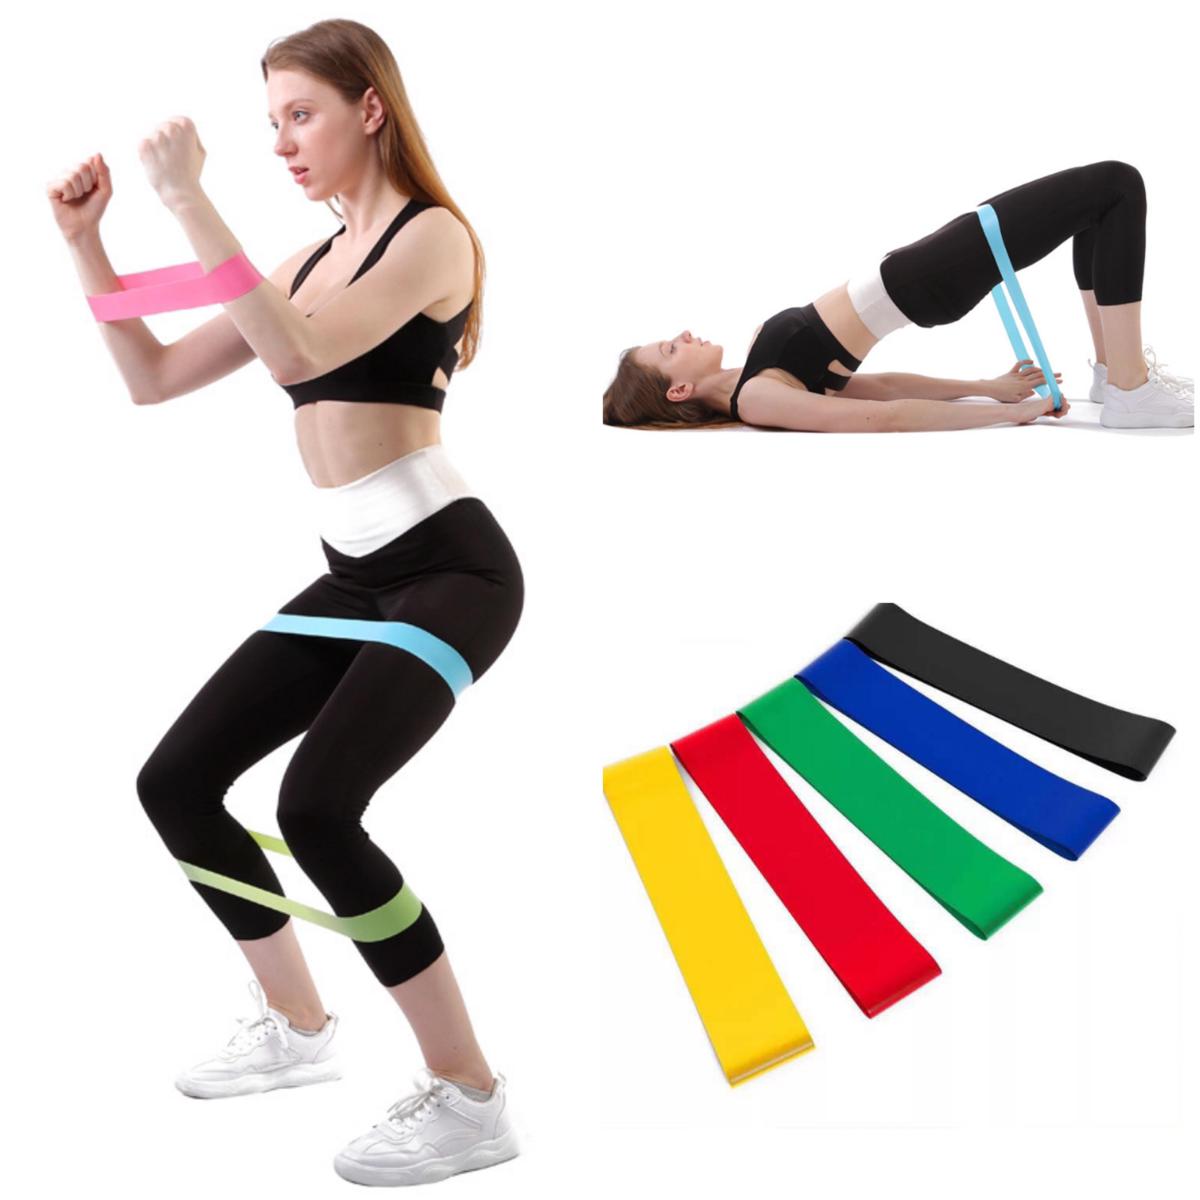 5 Bands resistance belt Gym Exercise Sports for Men and Women